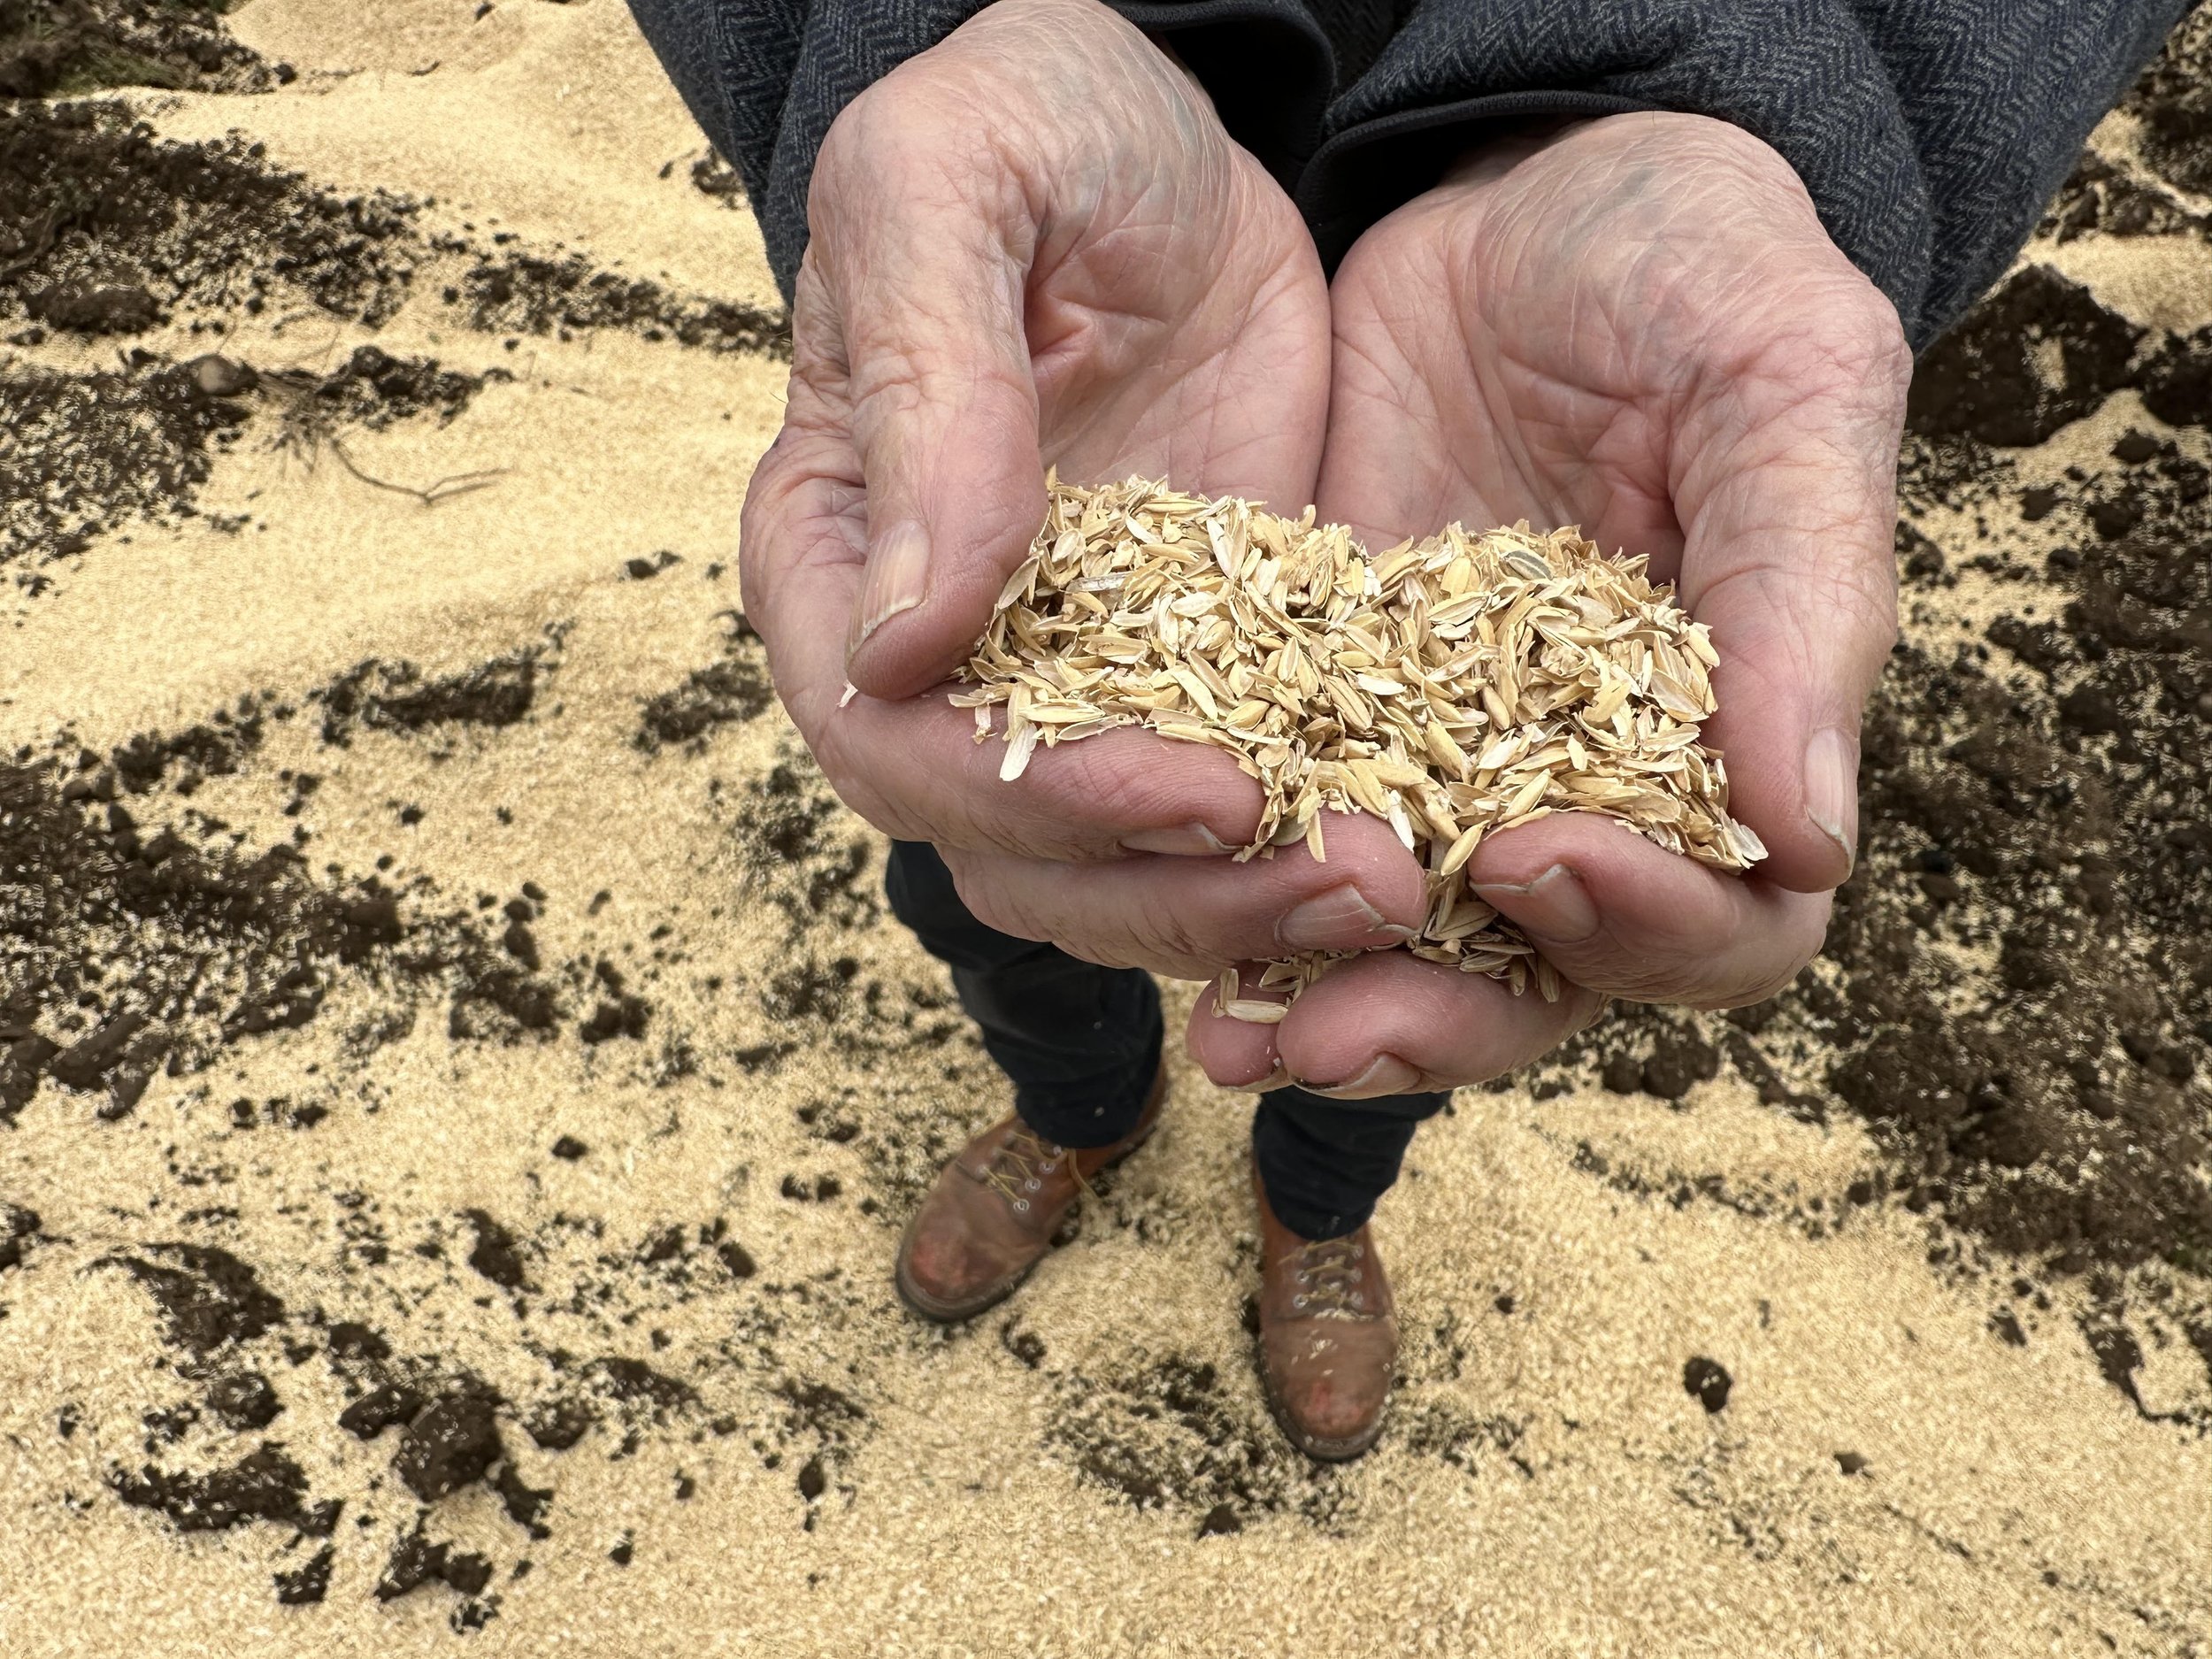 Rice hulls were used to amend the soil, along with a rich dark compost and smaller amounts of seacoast compost, blood meal, seagull guano, worm castings, and biochar